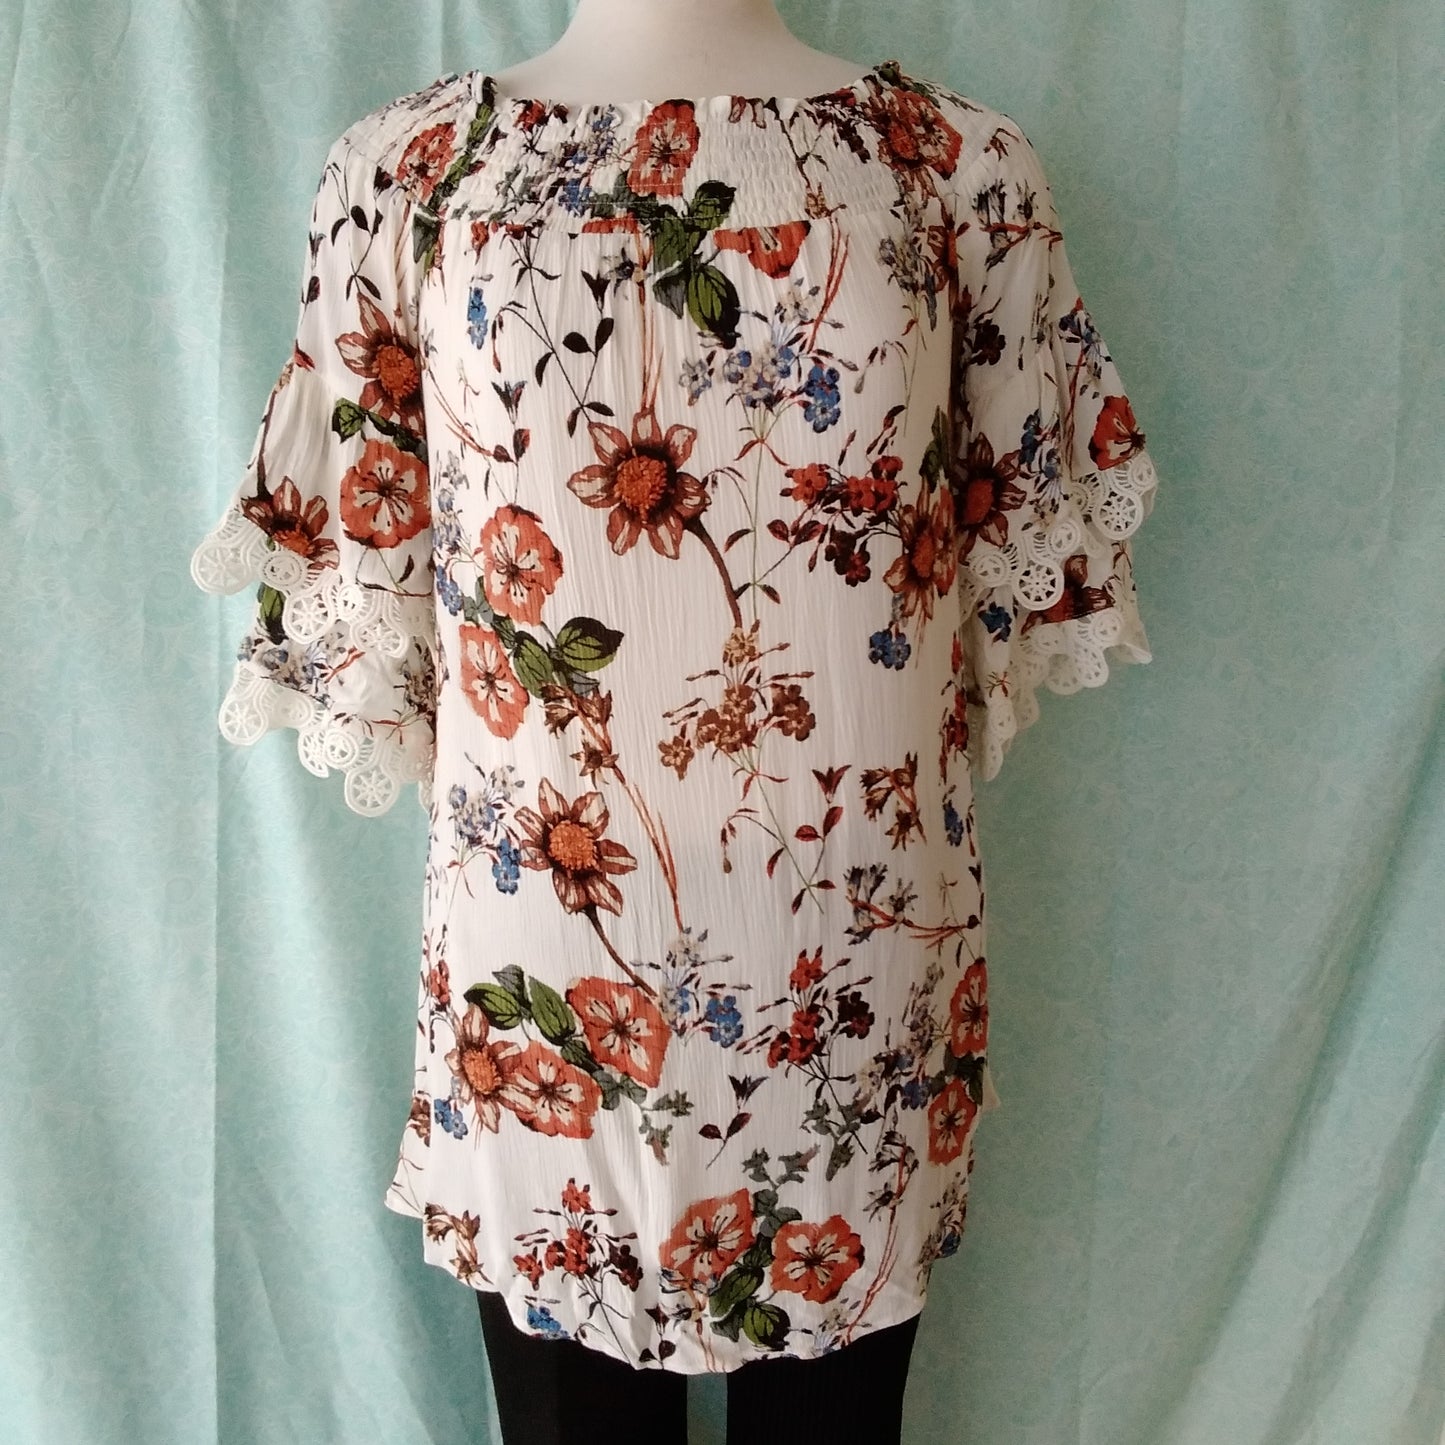 NWT - Blu Pepper floral Lace Flutter Sleeve Top - S